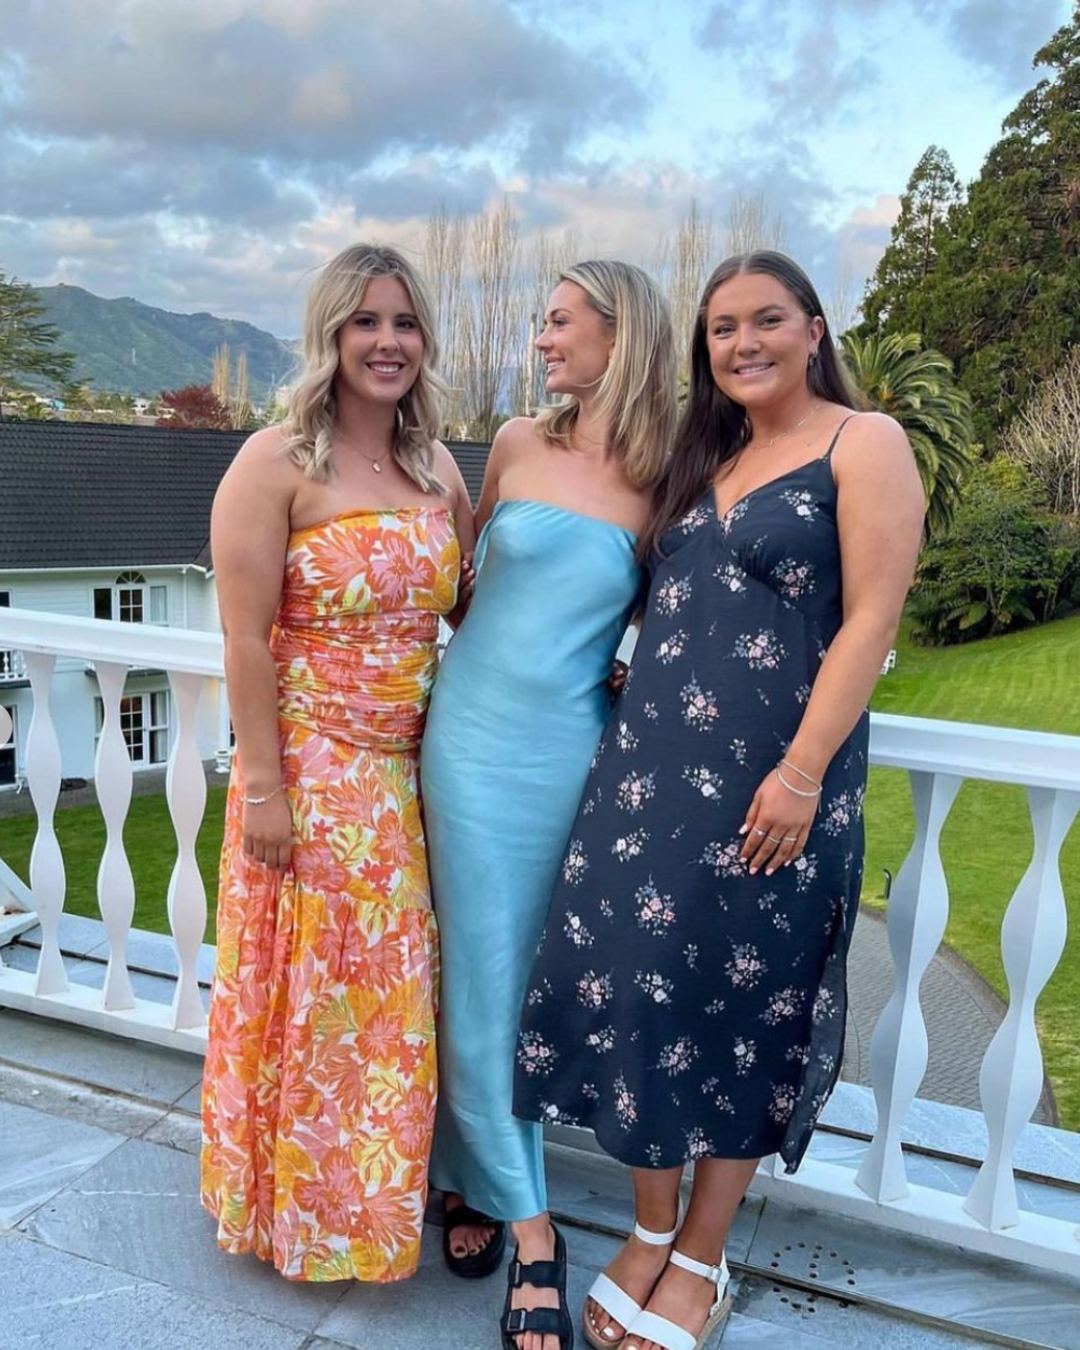 Three women pose in different dresses.